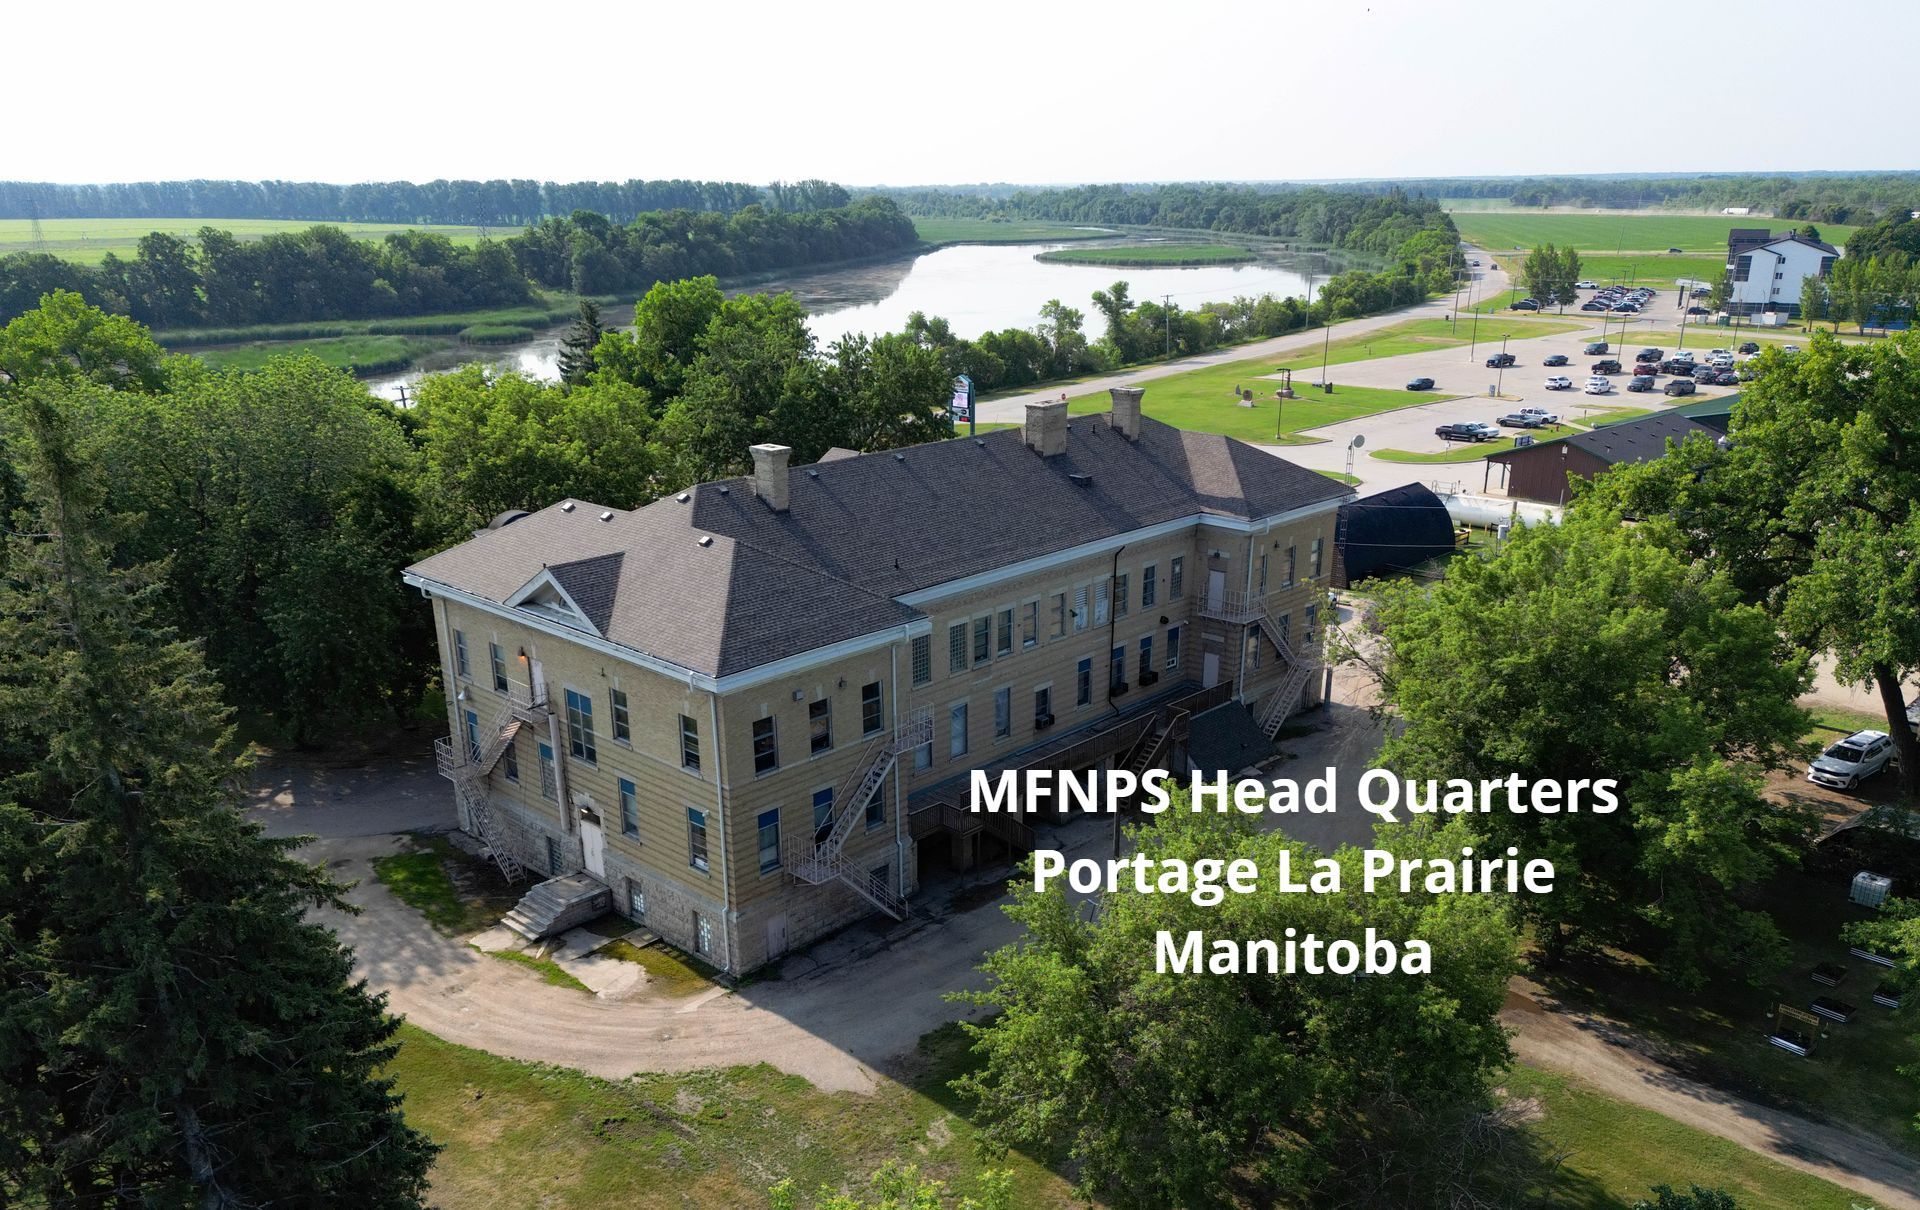 MFNPS-Manitoba First Nations Police Service Headquarters in Portage La Prairie